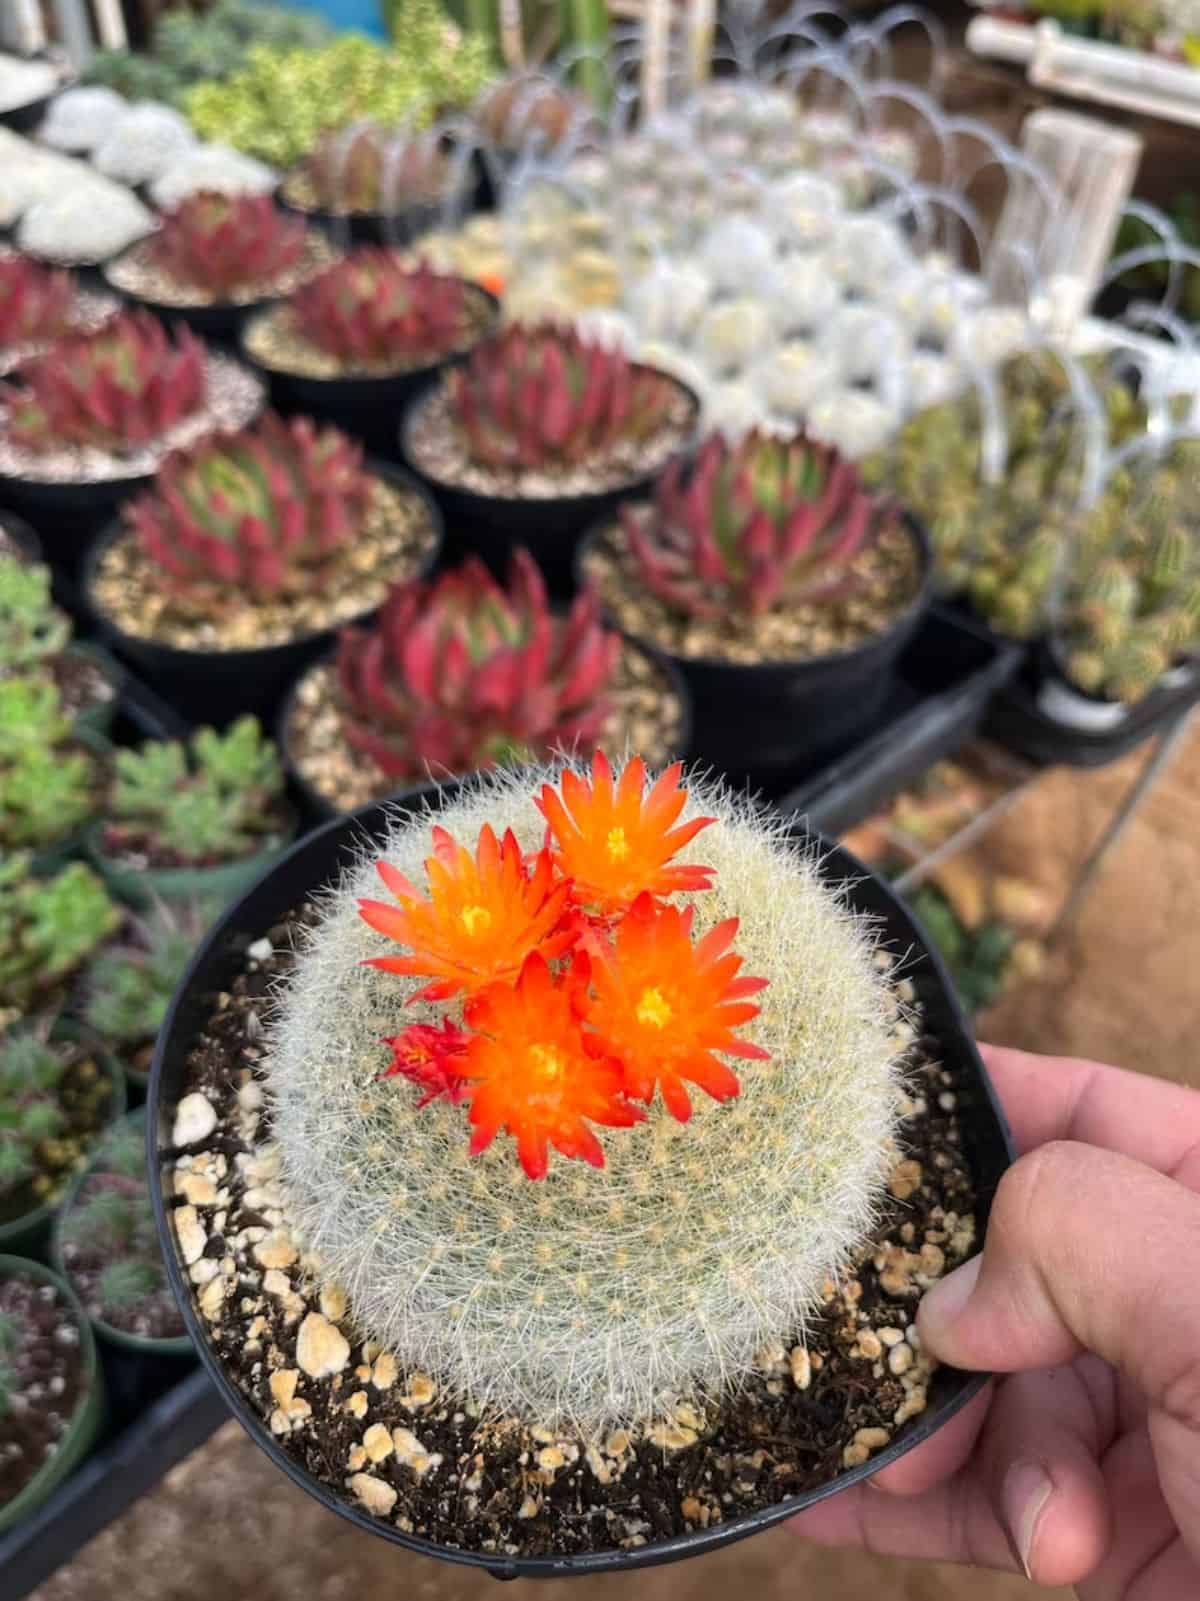 Notocactus haselbergii with four orange flowers grows in a plastic pot held by hand.